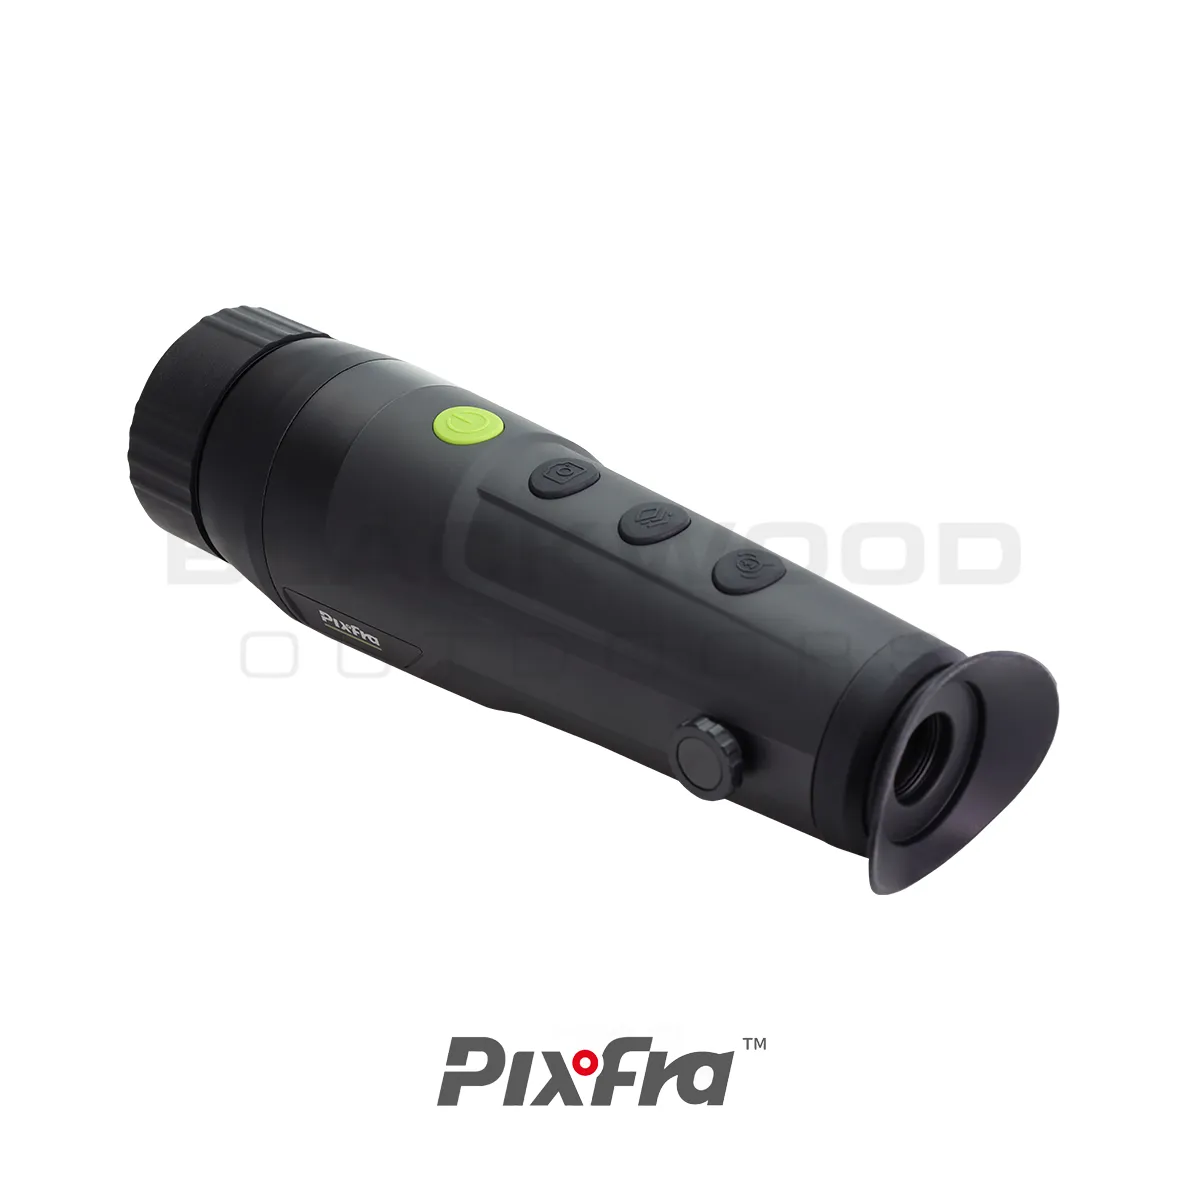 Pixfra Ranger R650 Thermal Angle View